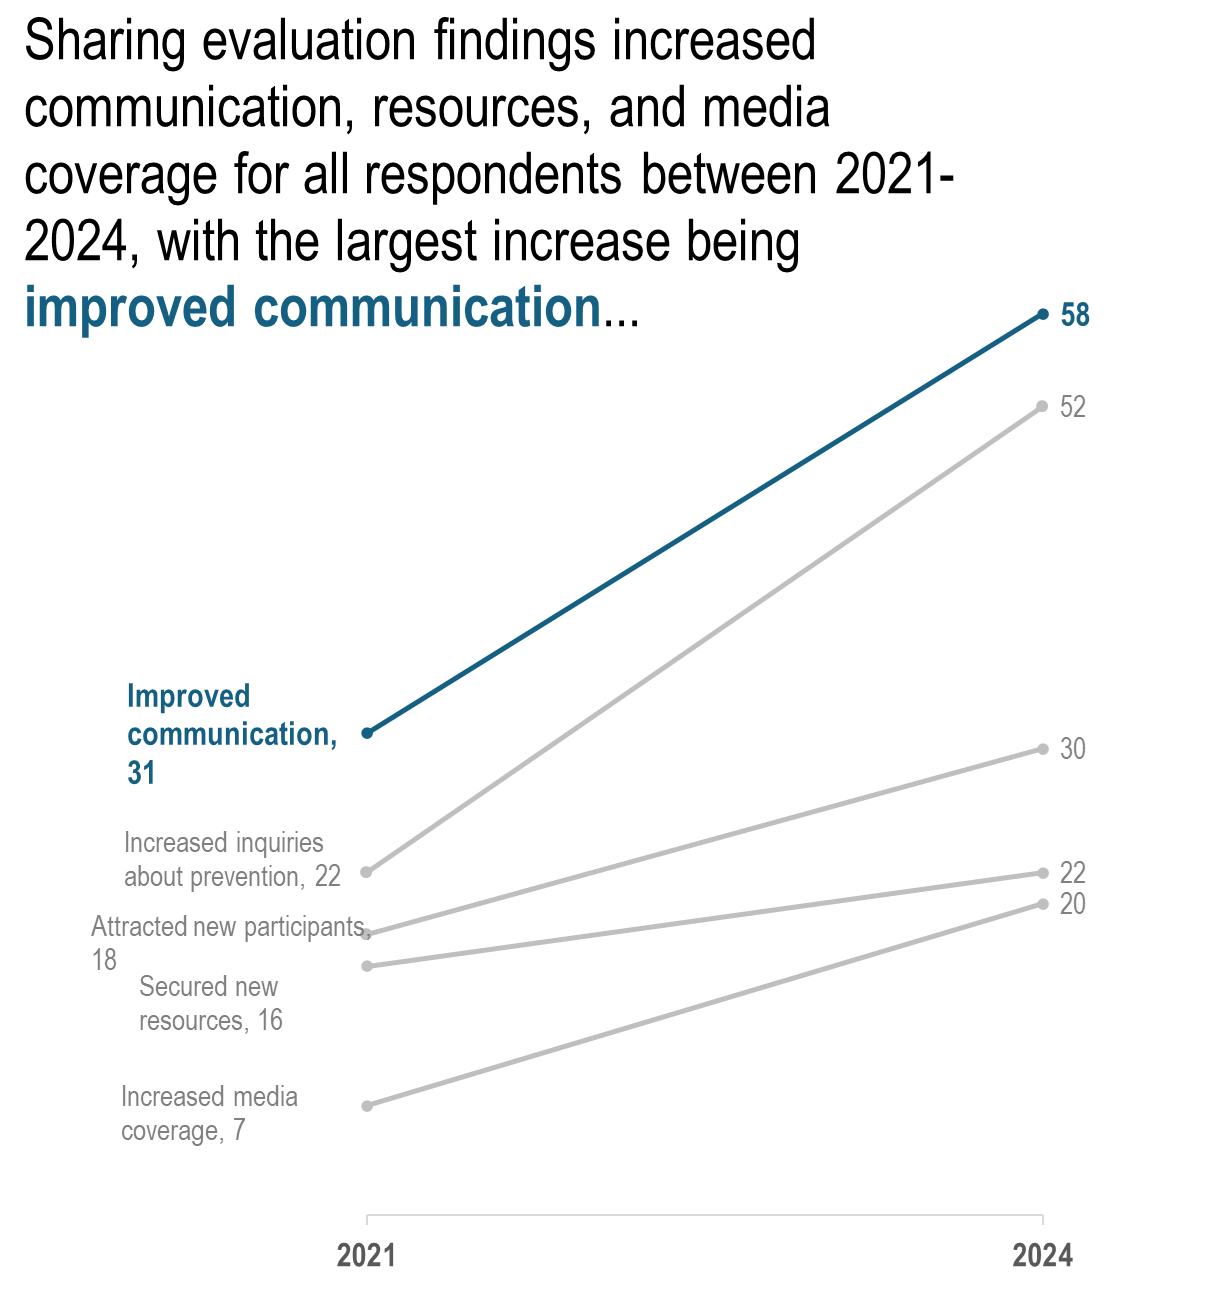 Slope graph showing that sharing evaluation findings increased communication, resources, and media coverage for all respondents between 2021 and 2024, with the largest increase being improved communication.